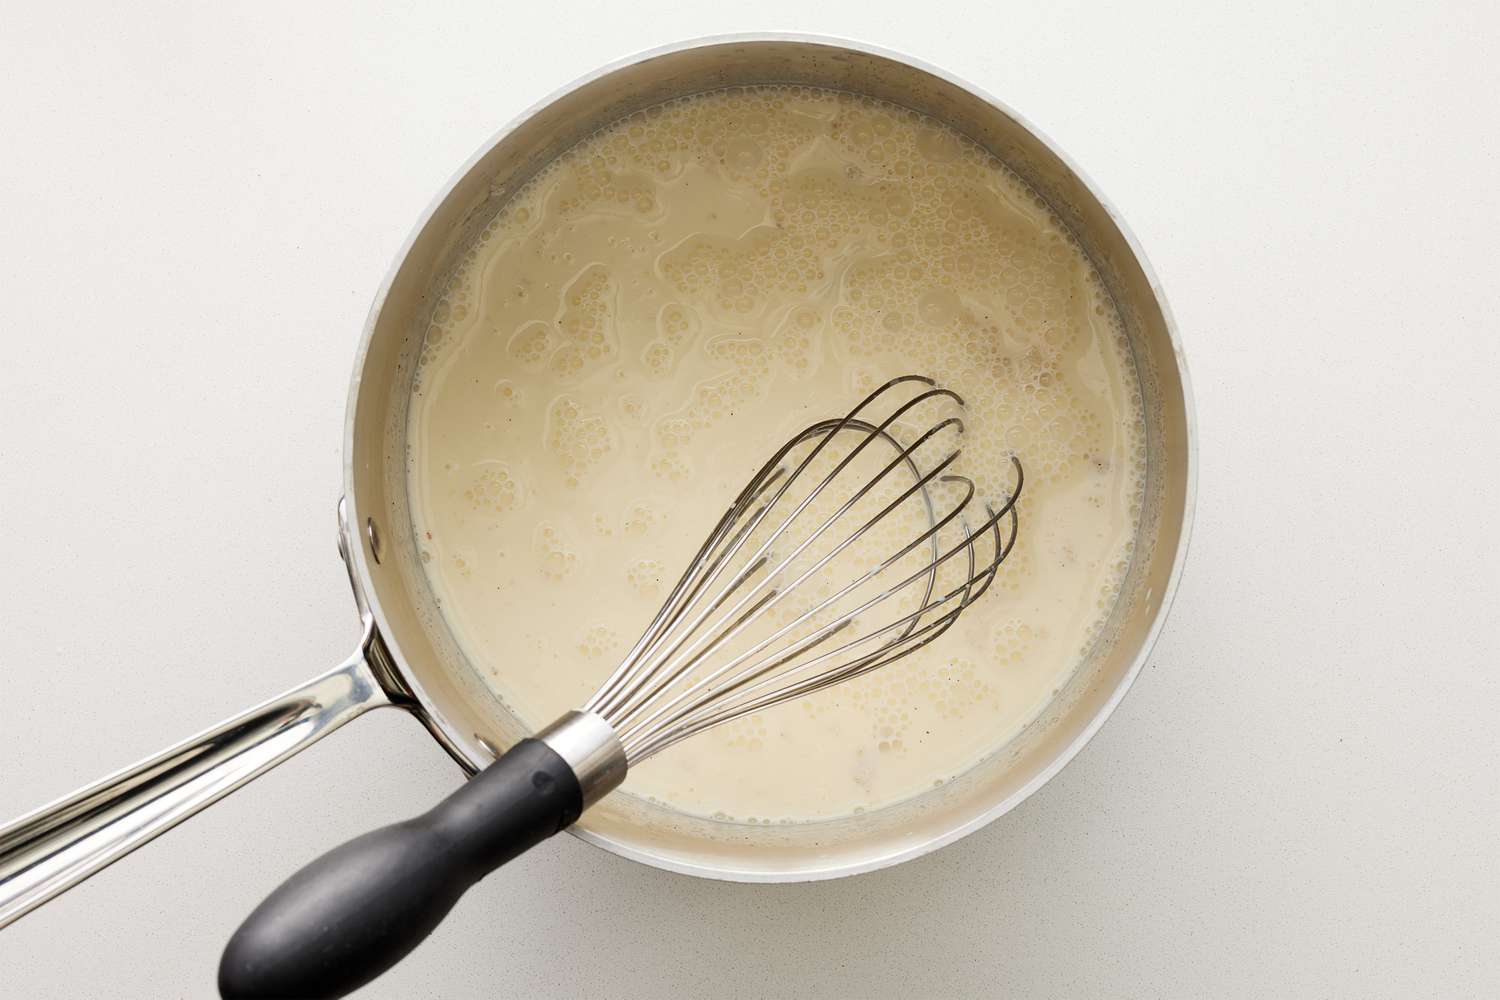 A whisk mixing bloomed gelatin into the pot with warmed cream and sugar